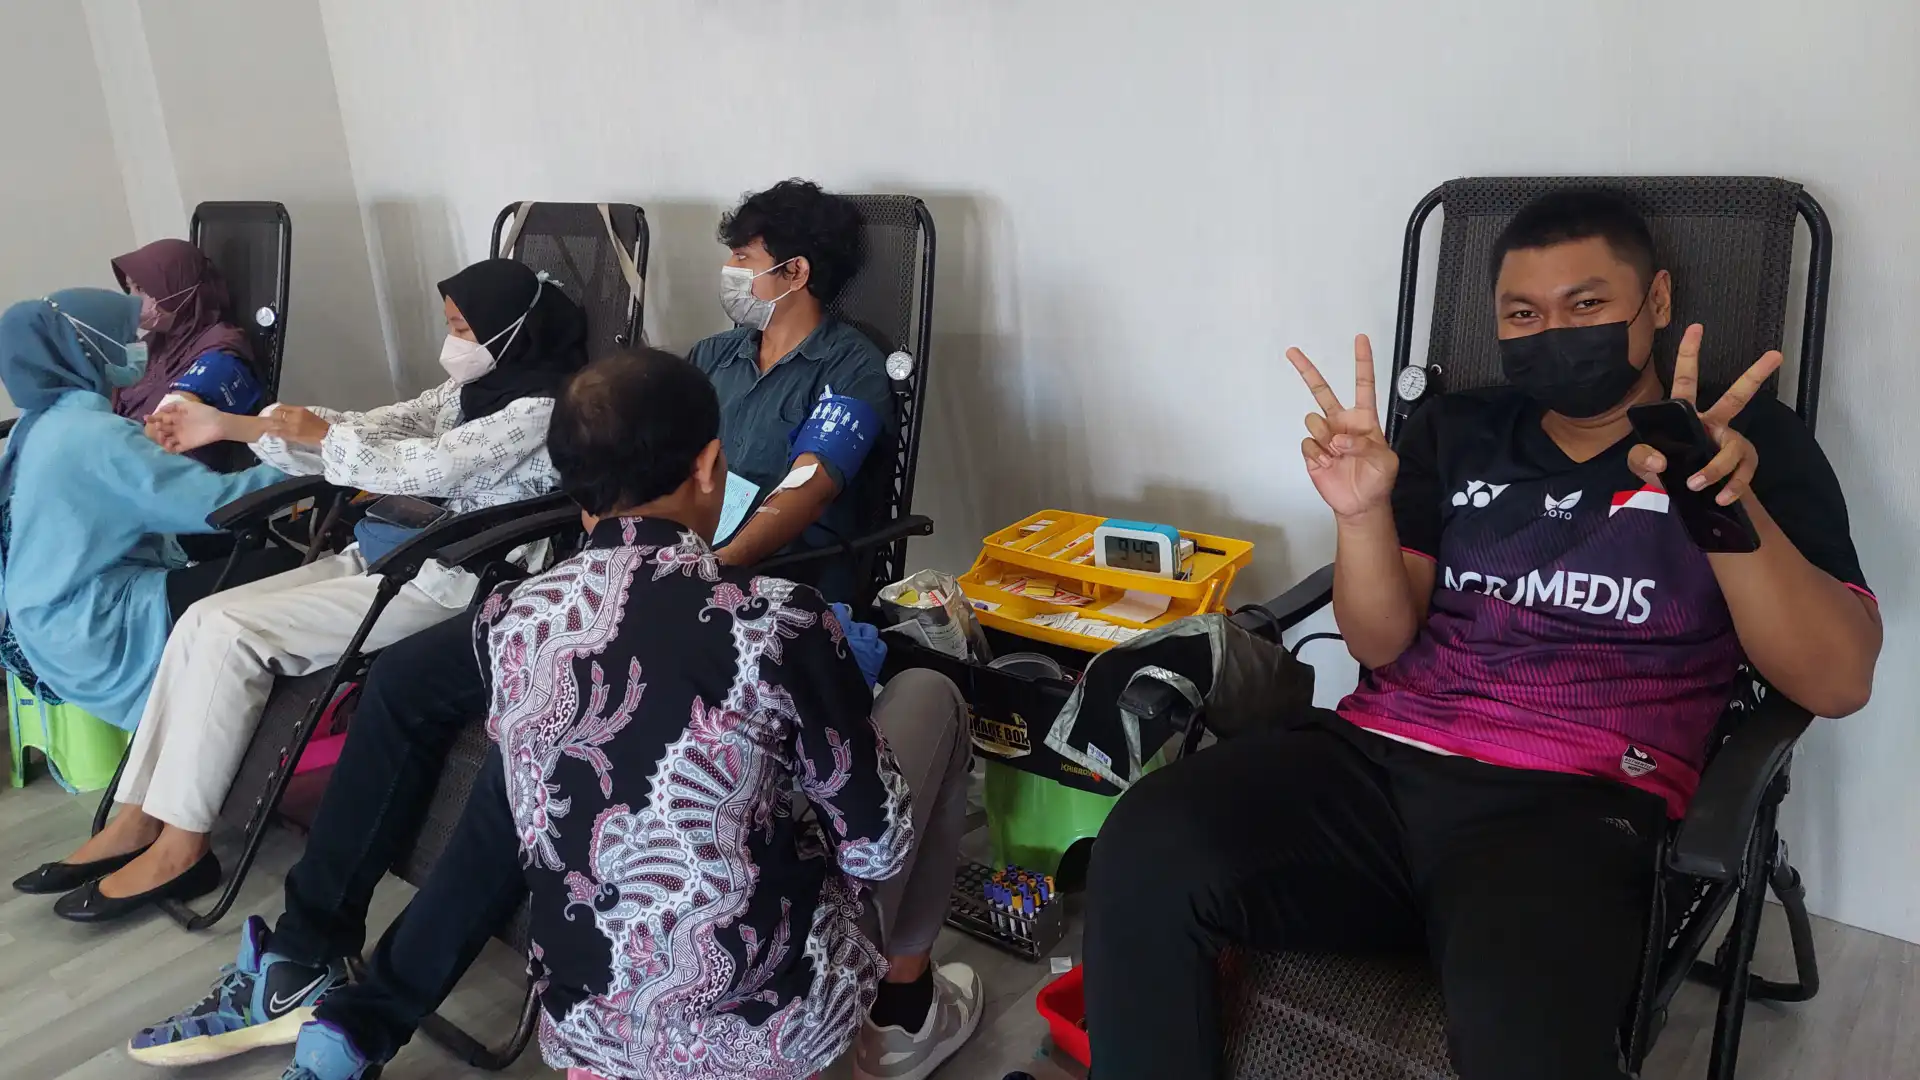 TBM Vertex UKM Collaborates with PMI Jember Regency Branch to Hold Blood Donation Activities